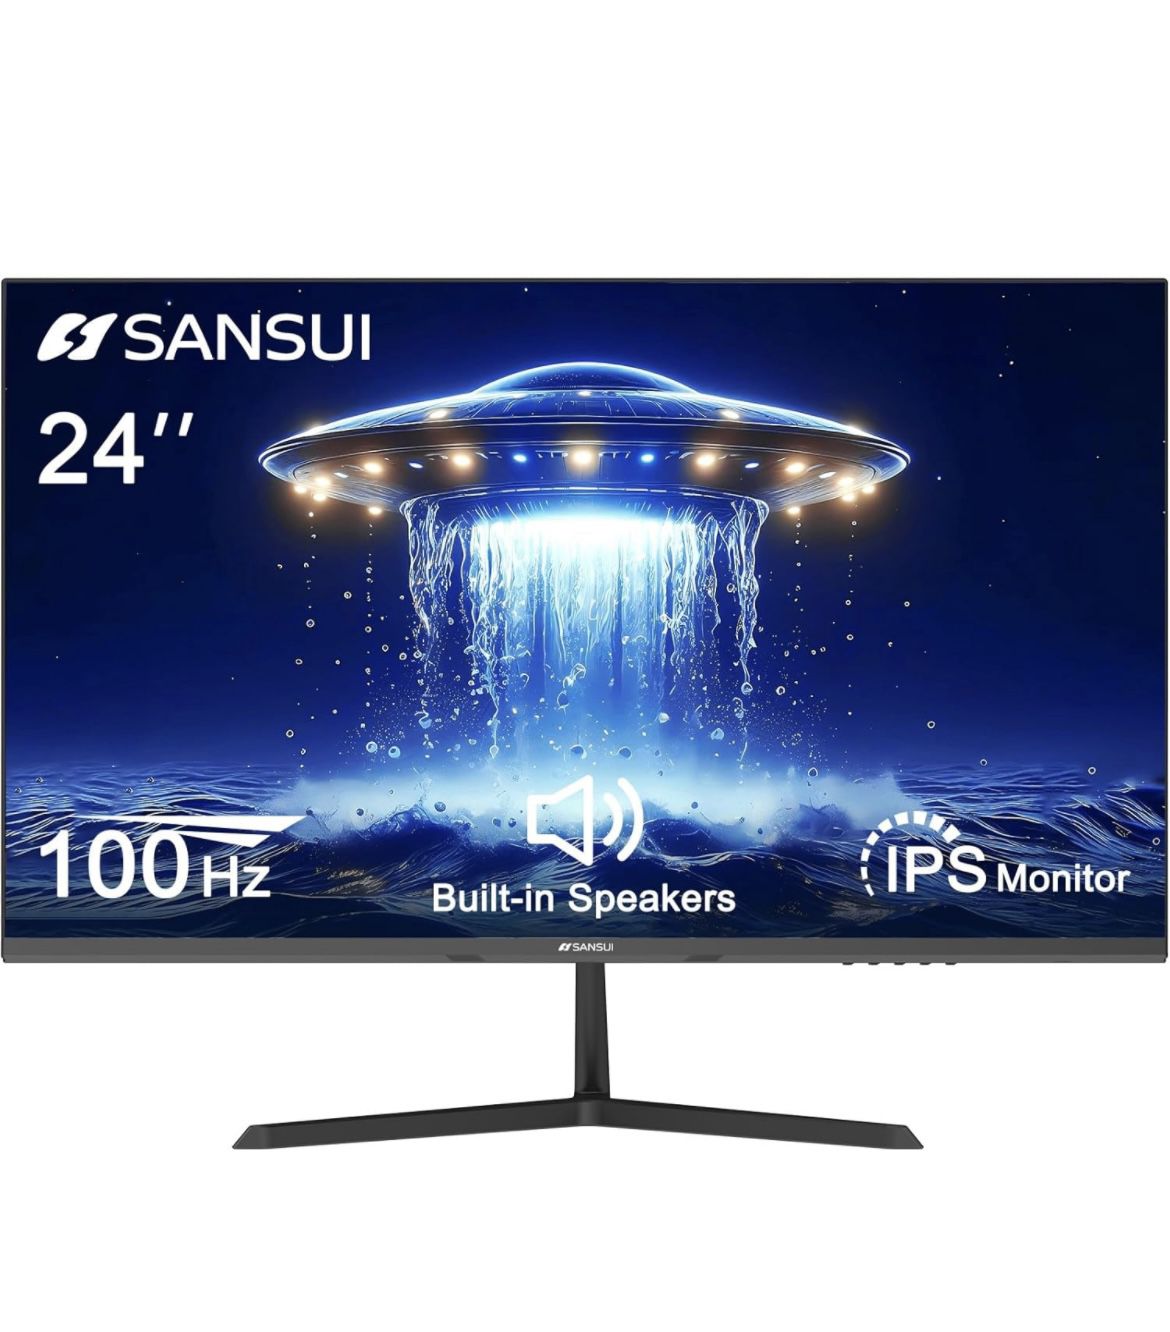 IN BOX: SANSUI 24 inch Monitor, IPS Display Computer Monitor with Built-in Speakers